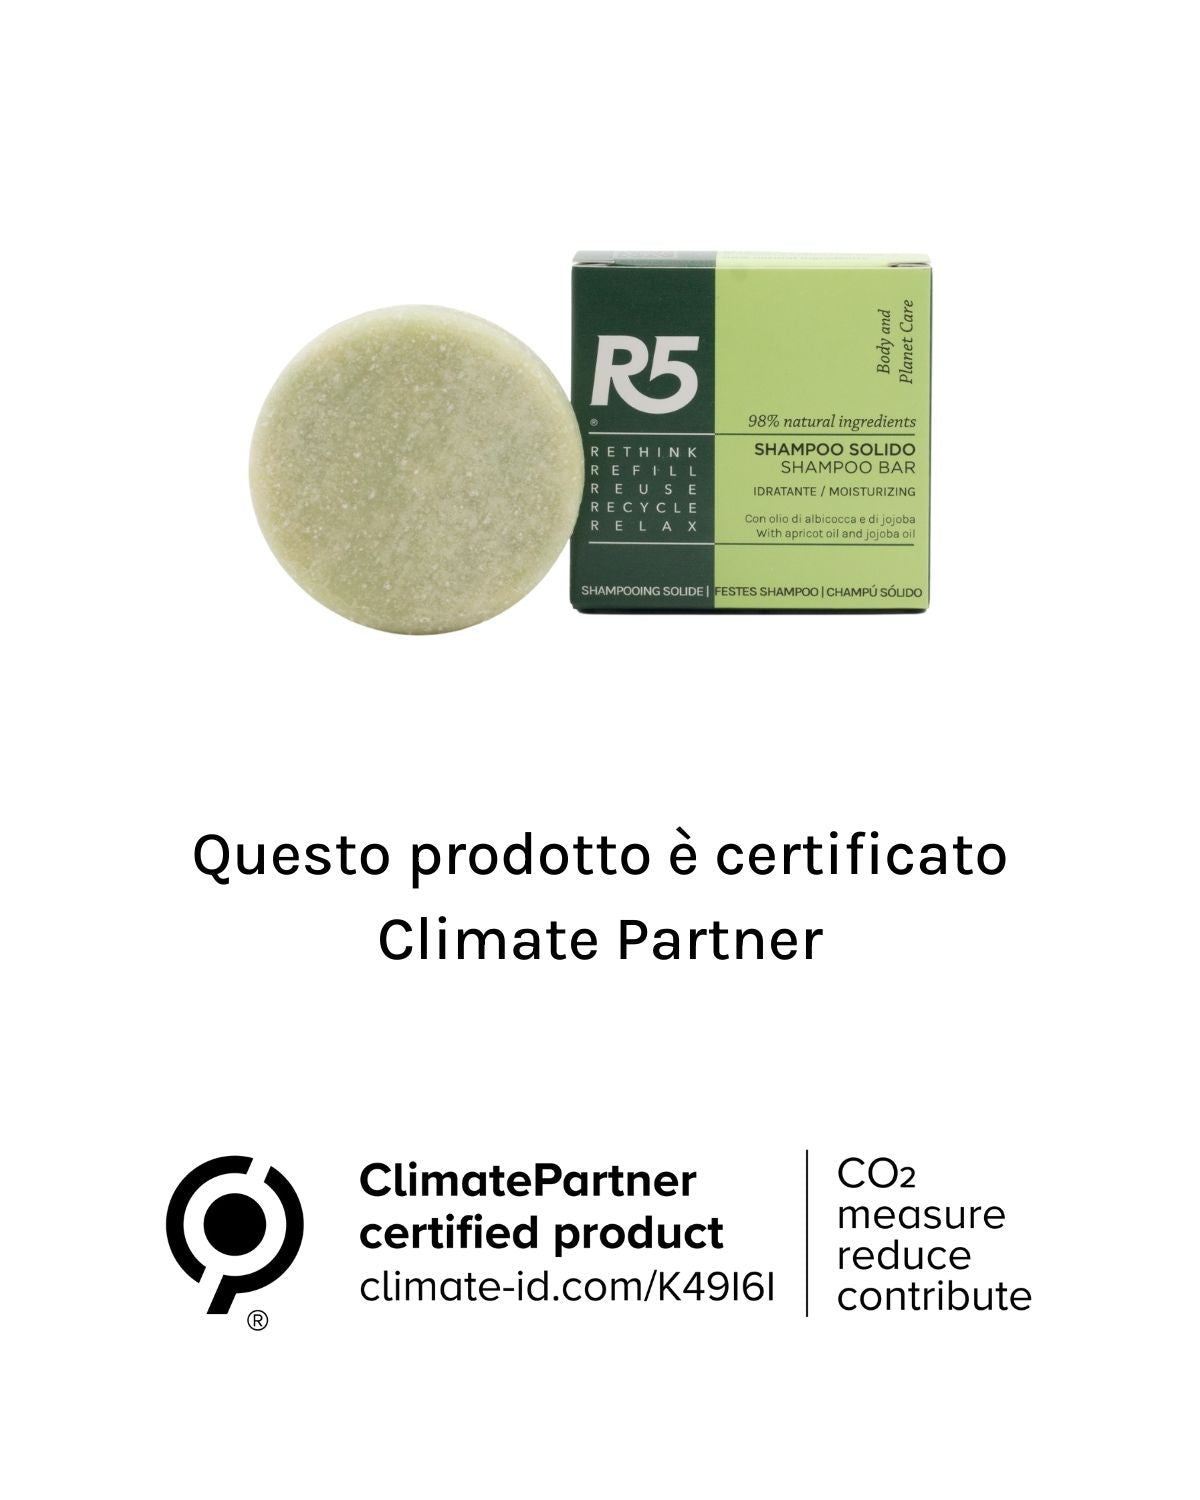 Climate Partner certified shampoo